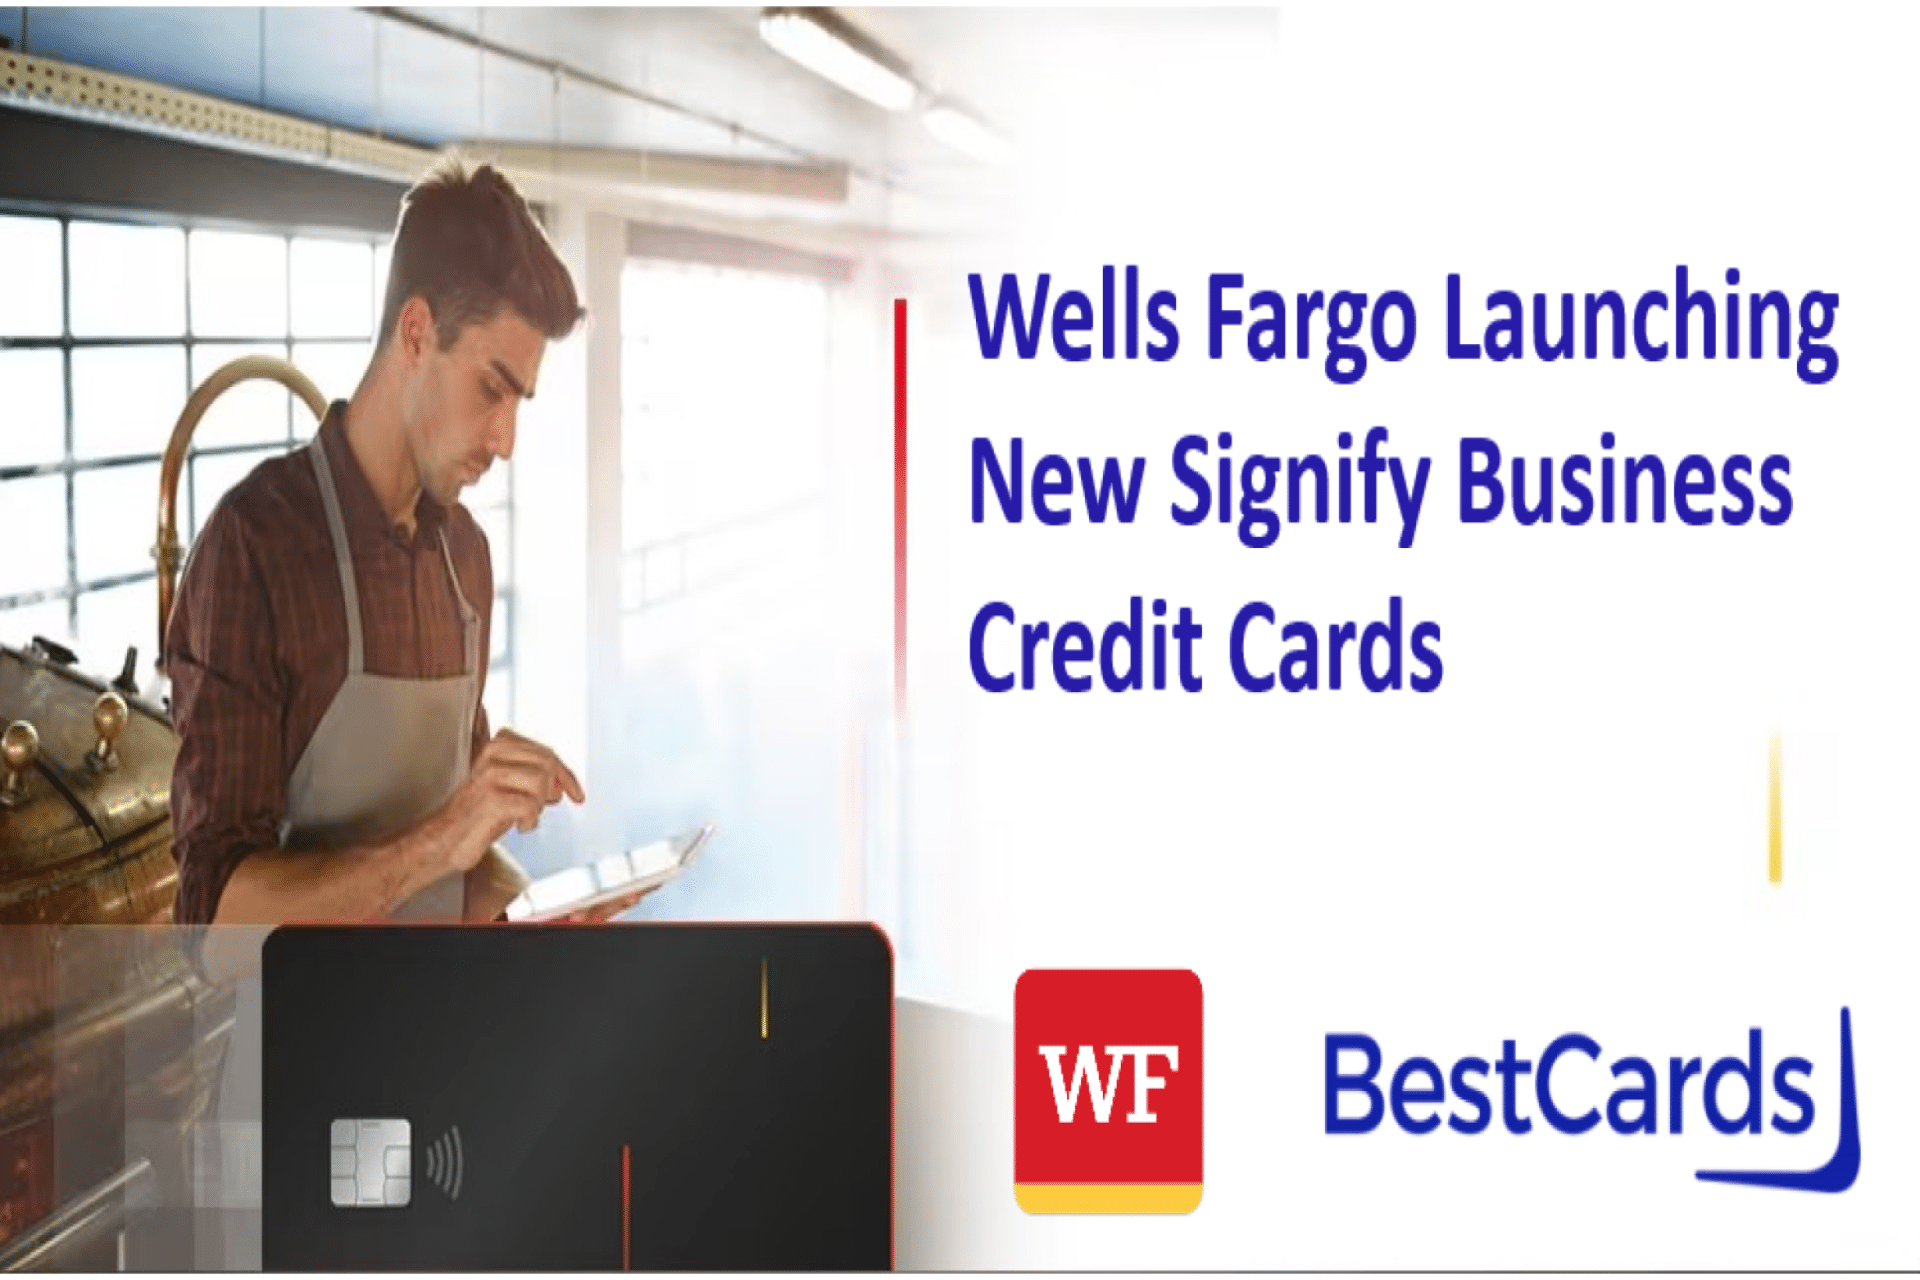 Wells Fargo Signify Business Mastercard credit cards to launch soon